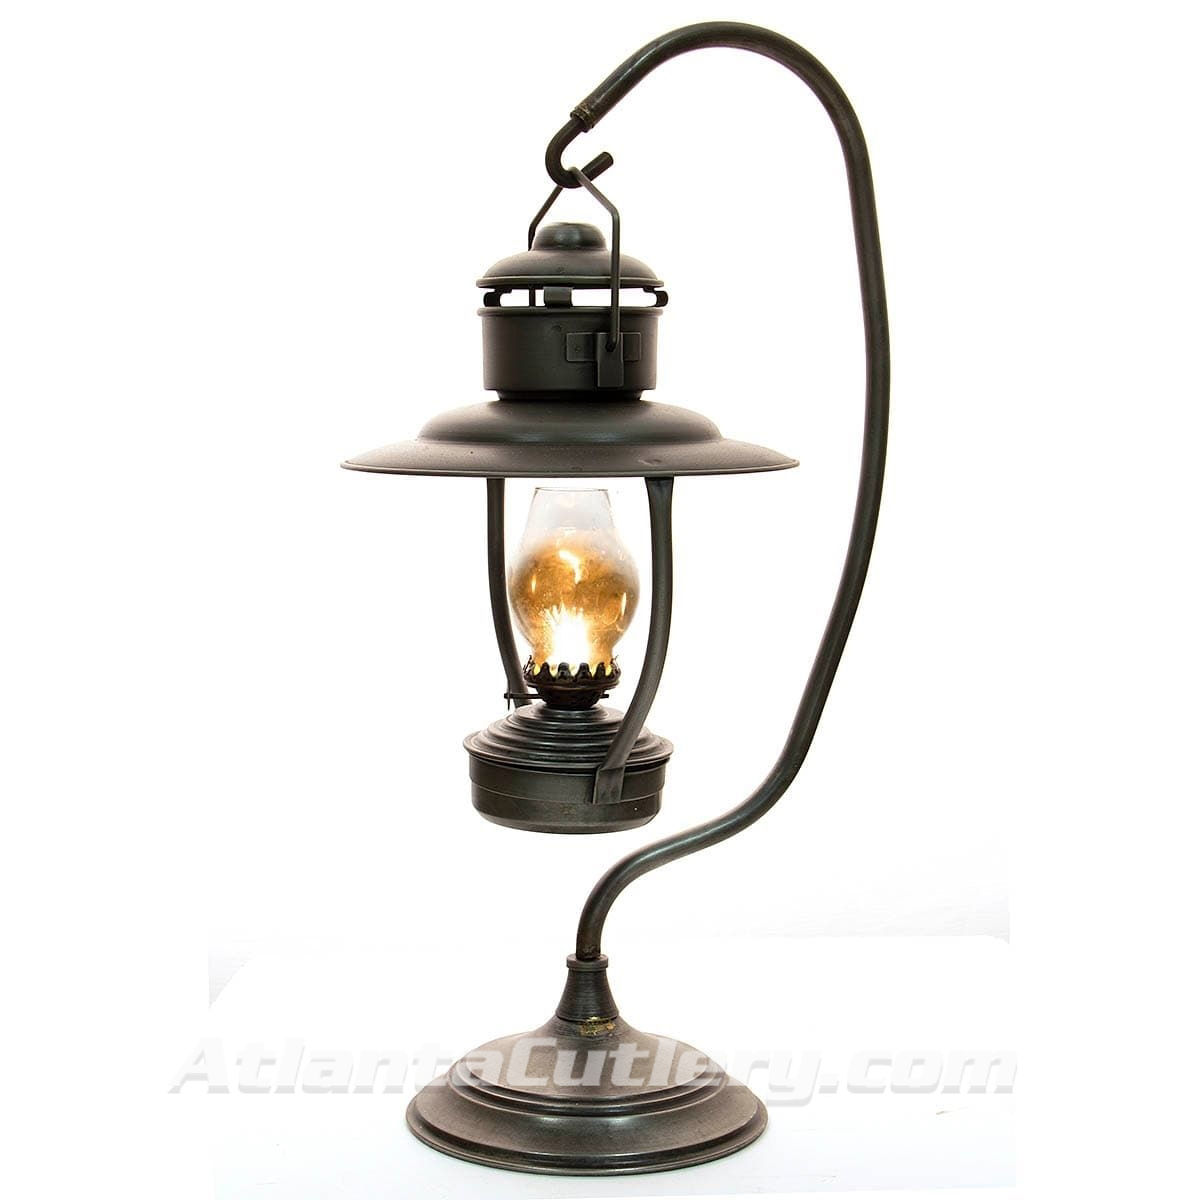 Lighted Period Oil Lamp with stand